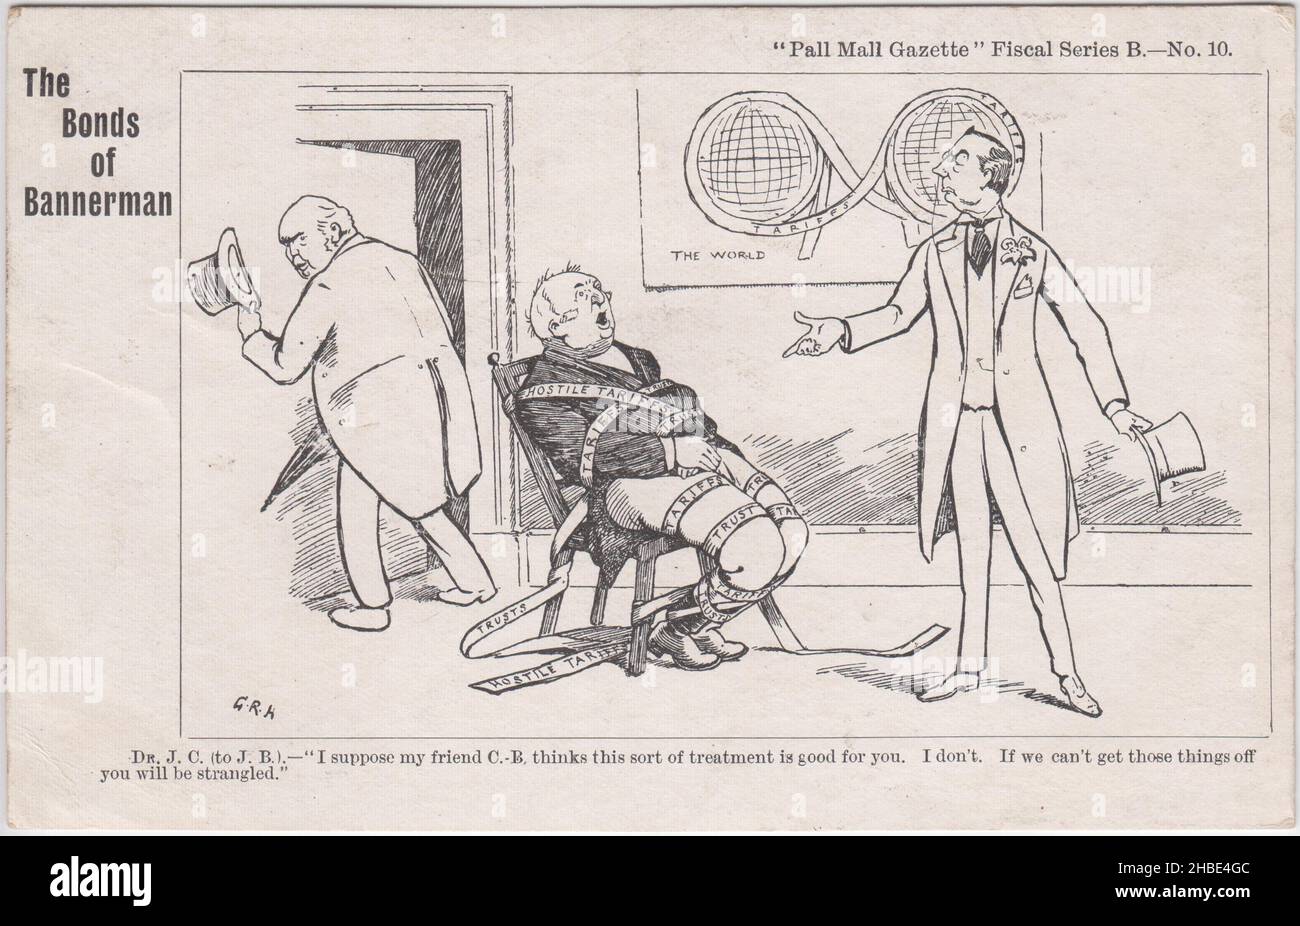 'The Bonds of Bannerman'. 'Dr J.C. (to J.B.) - 'I suppose my friend C.-B. thinks this sort of treatment is good for you. I don't. If we can't get those things off you will be strangled.' Cartoon showing Joseph Chamberlain addressing John Bull (representing Britain) whilst the latter is tied up in a chair with bonds representing hostile tariffs & trusts. Prime Minister Henry Campbell-Bannerman is shown walking out of the door. A picture on the wall shows 'The world' bound up with tariffs. Postcard published in the Pall Mall Gazette Fiscal Series B (no.10) Stock Photo